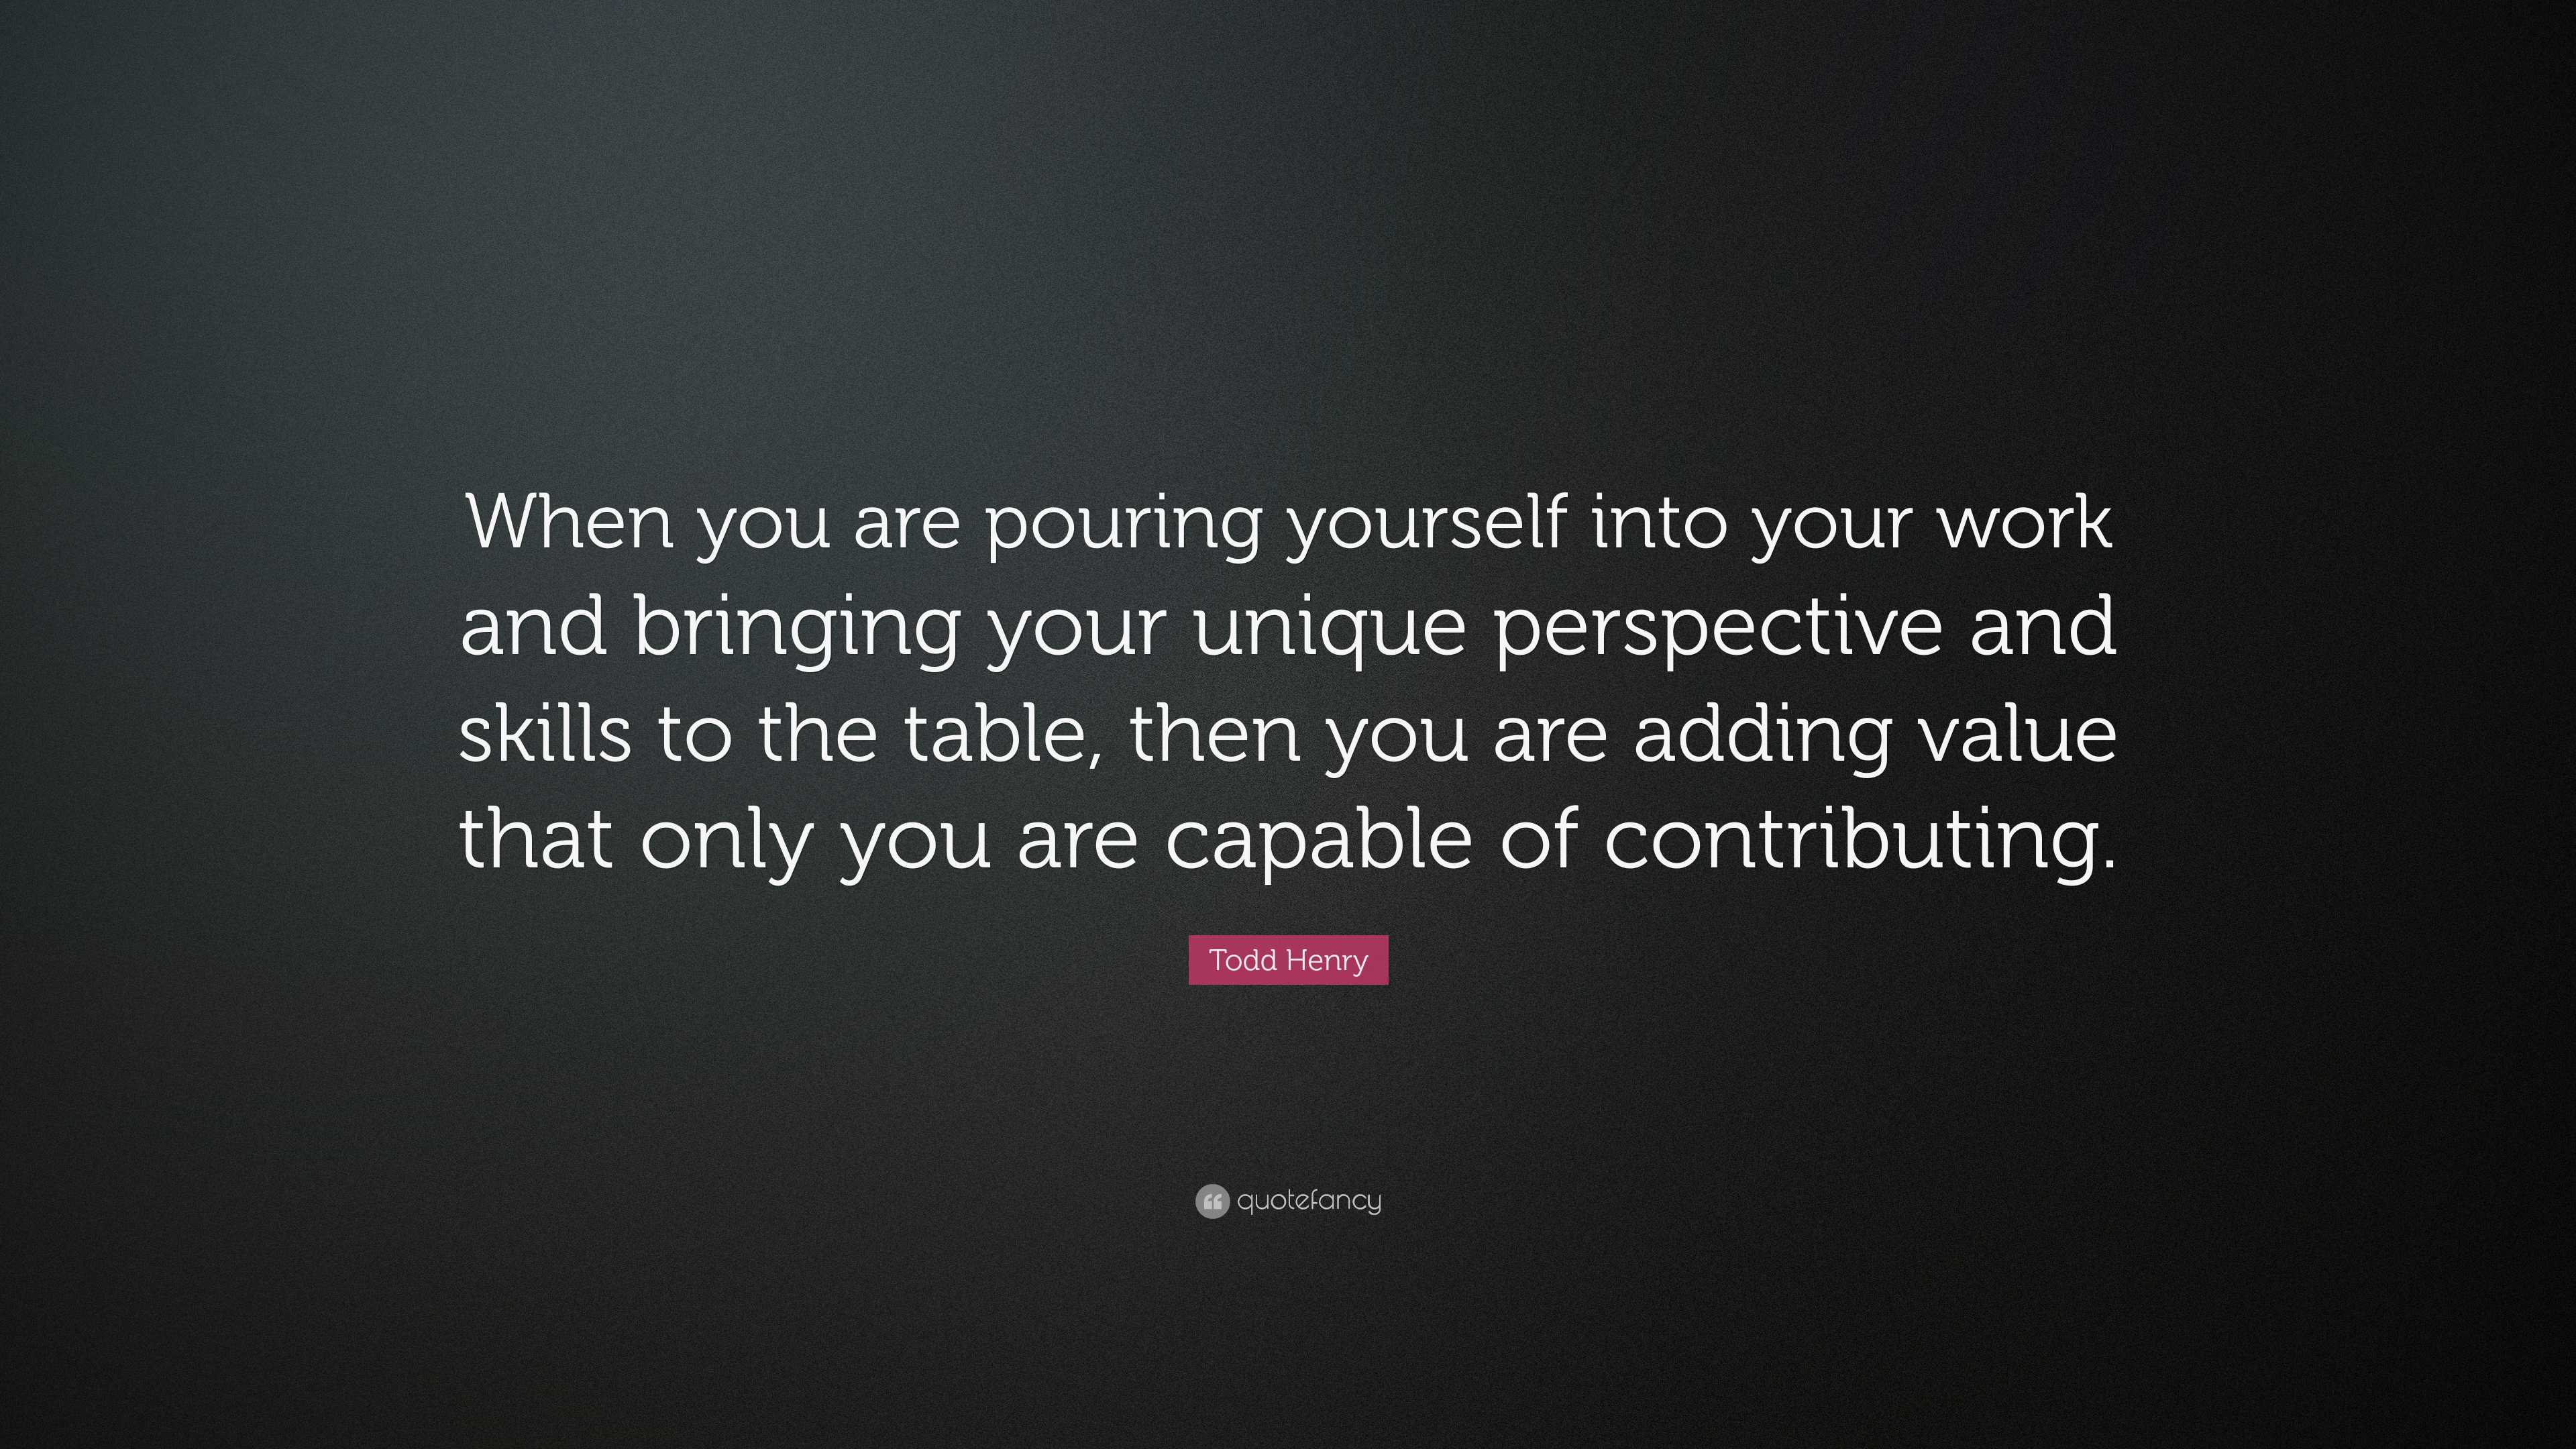 Todd Henry Quote: “When you are pouring yourself into your work and ...